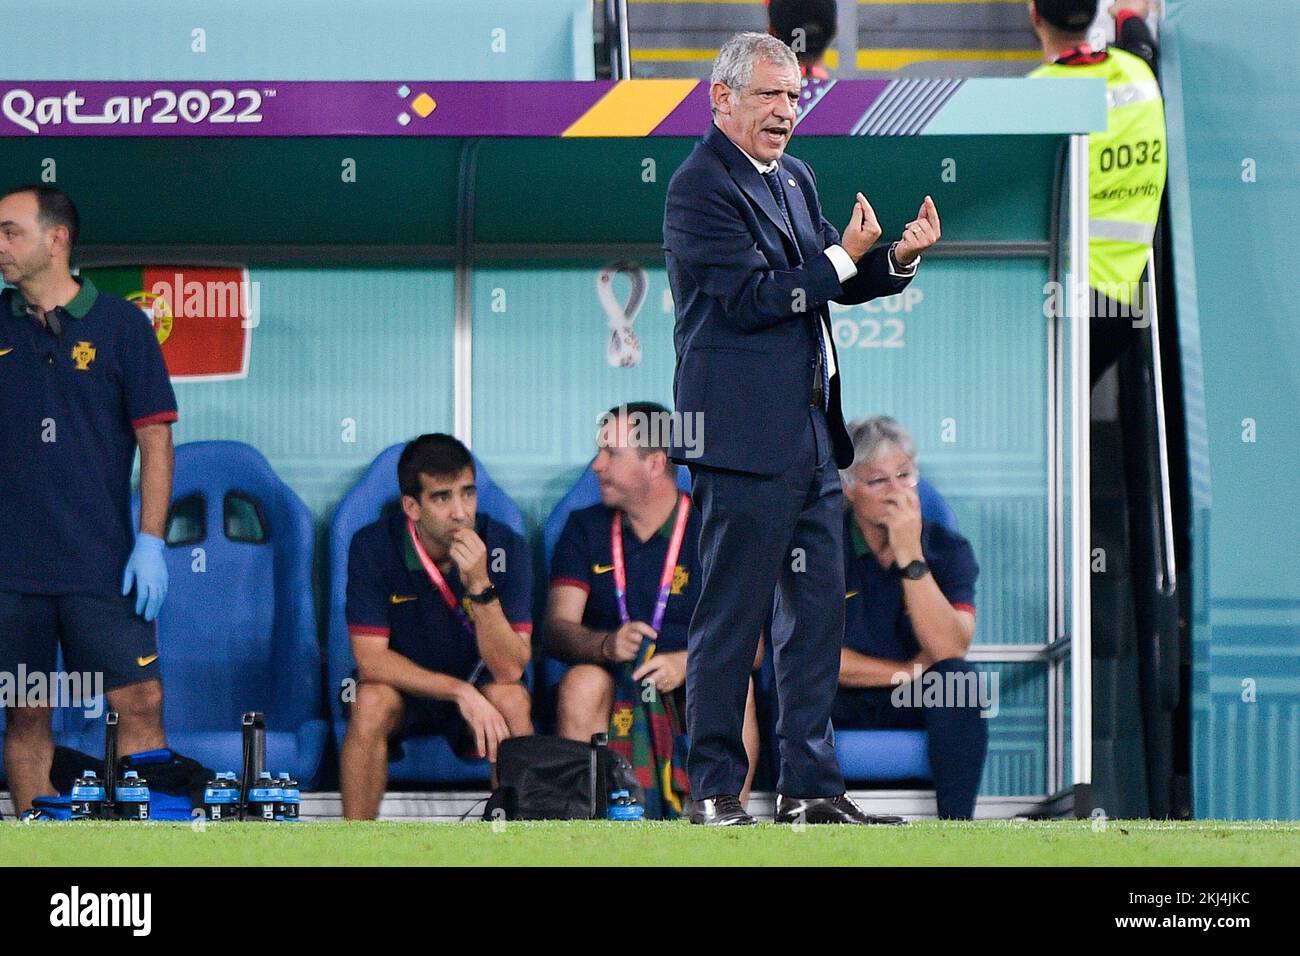 DOHA, QATAR - NOVEMBER 24: Coach Fernando Santos of Portugal coaches his players during the Group H - FIFA World Cup Qatar 2022 match between Portugal and Ghana at the Stadium 974 on November 24, 2022 in Doha, Qatar (Photo by Pablo Morano/BSR Agency) Stock Photo